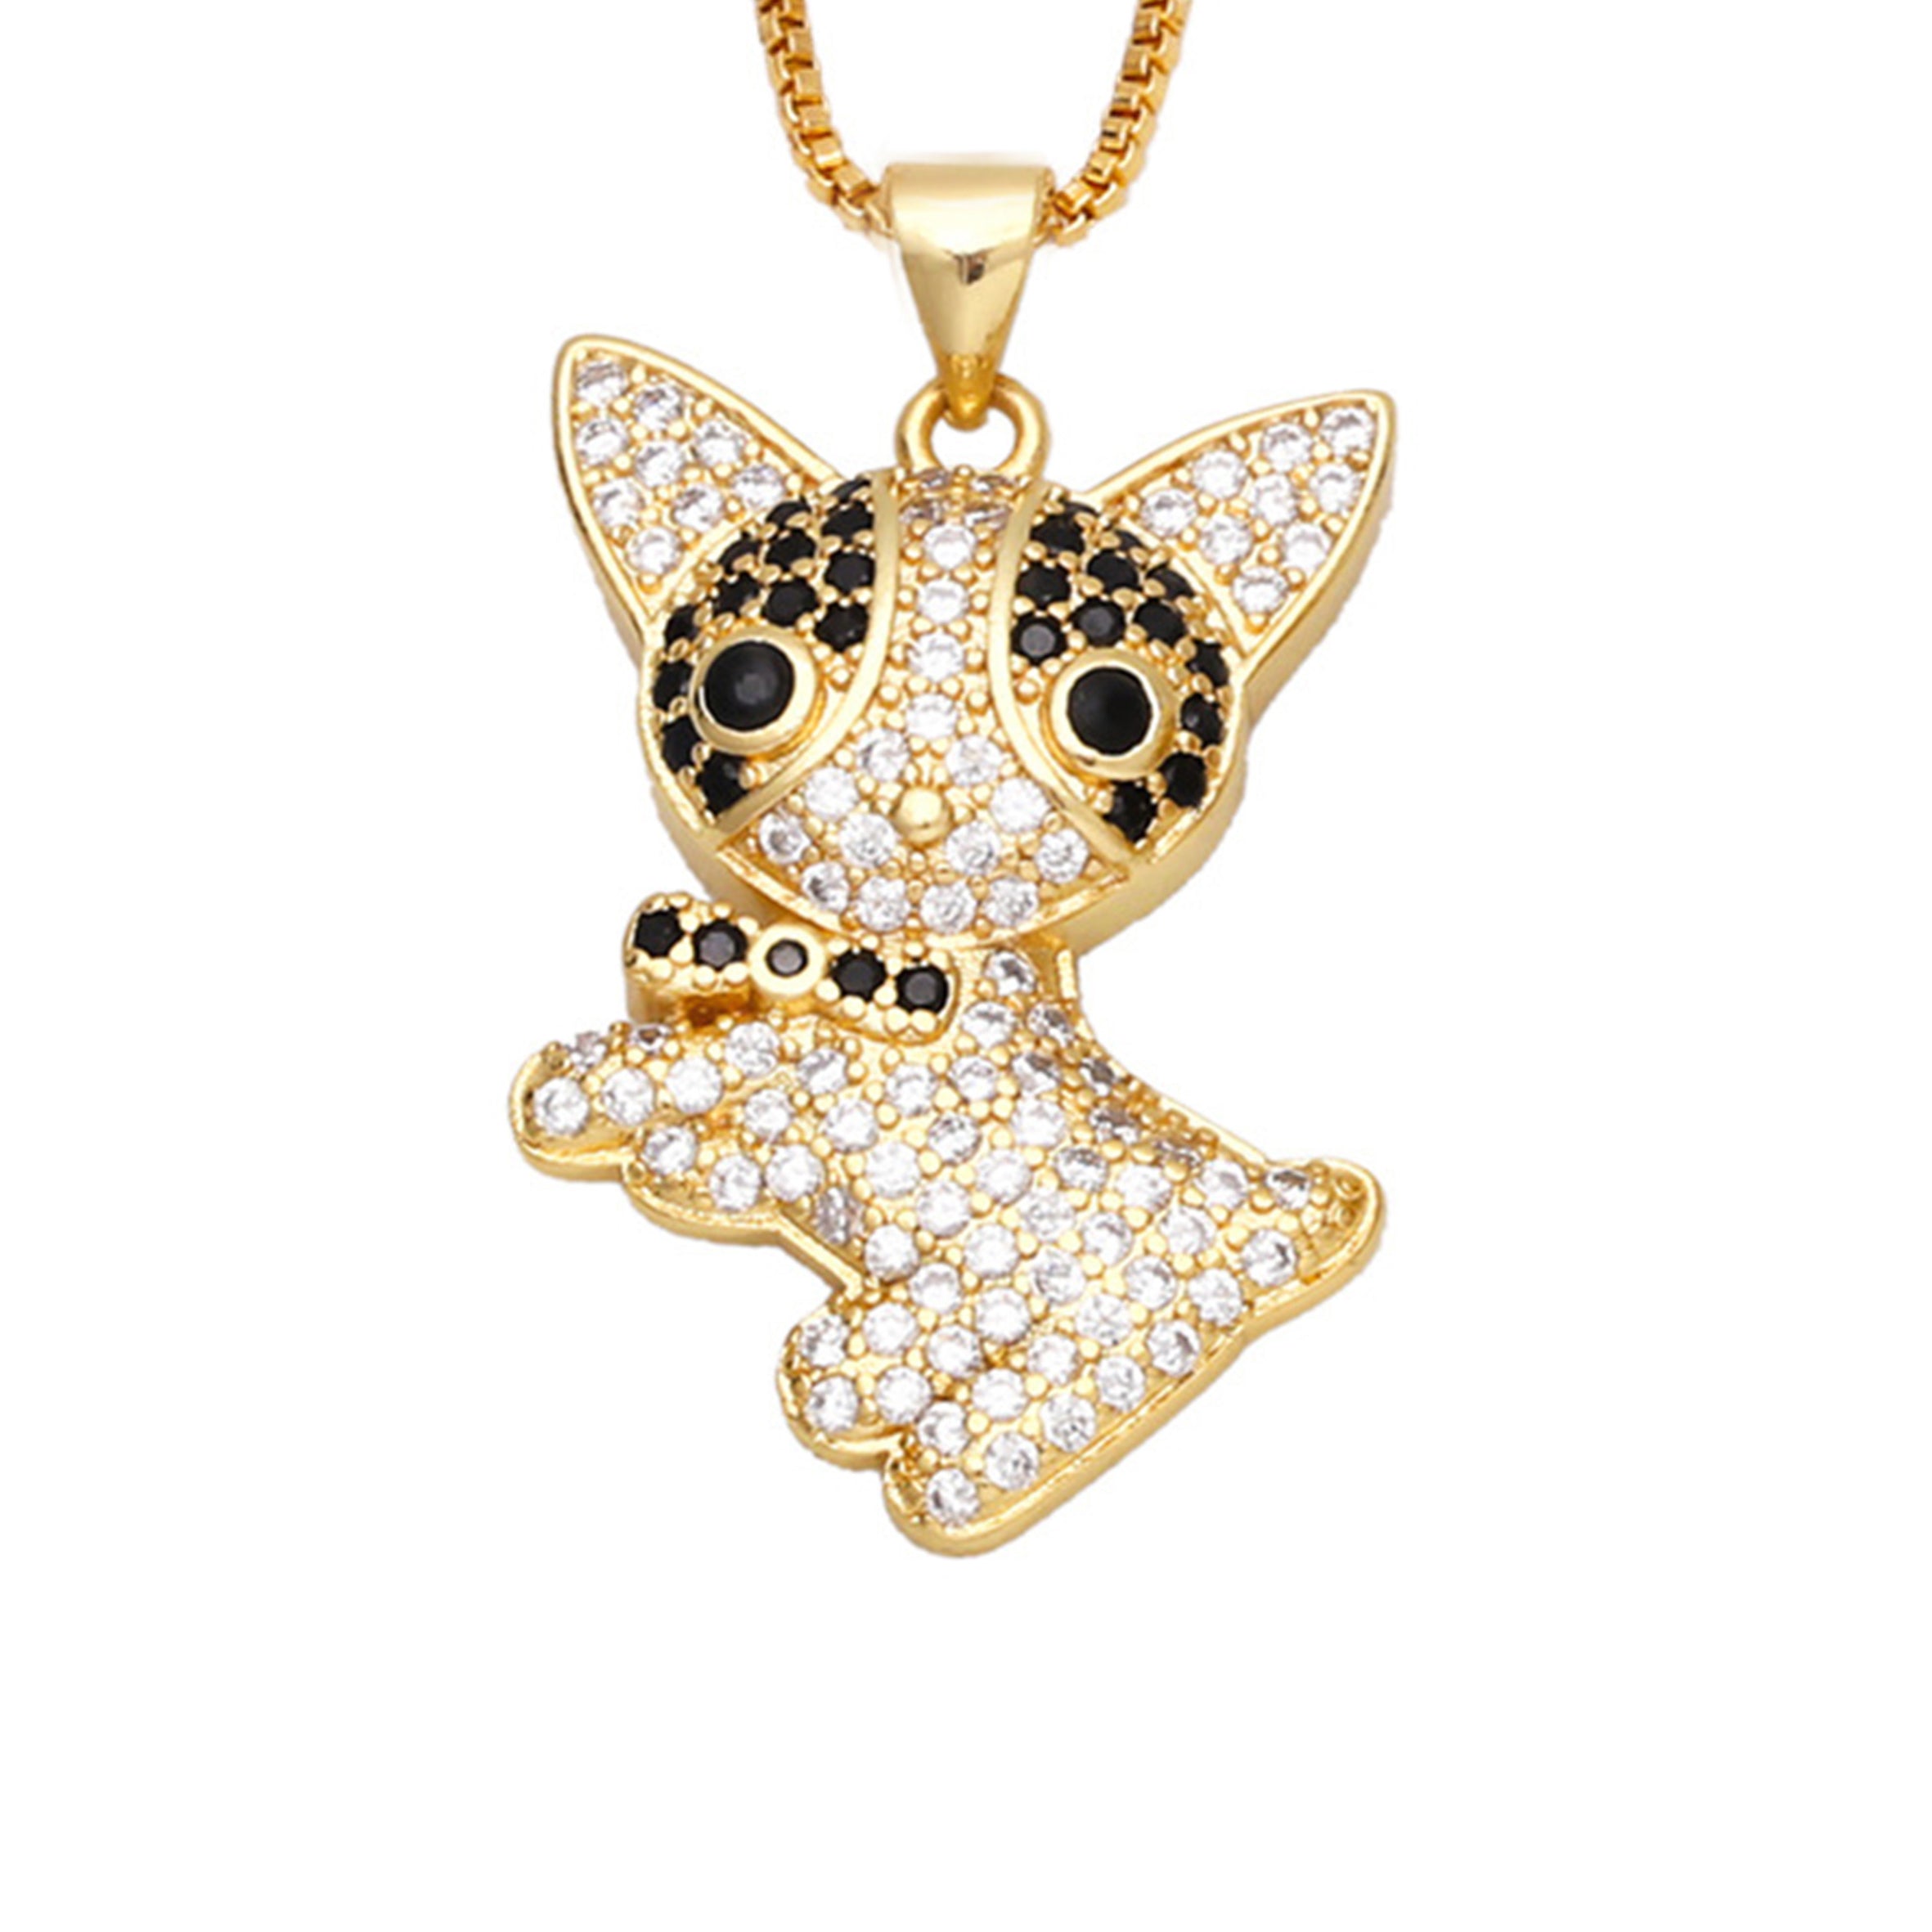 Kitty Cat Cubic Zirconia Pendant Necklace N5192